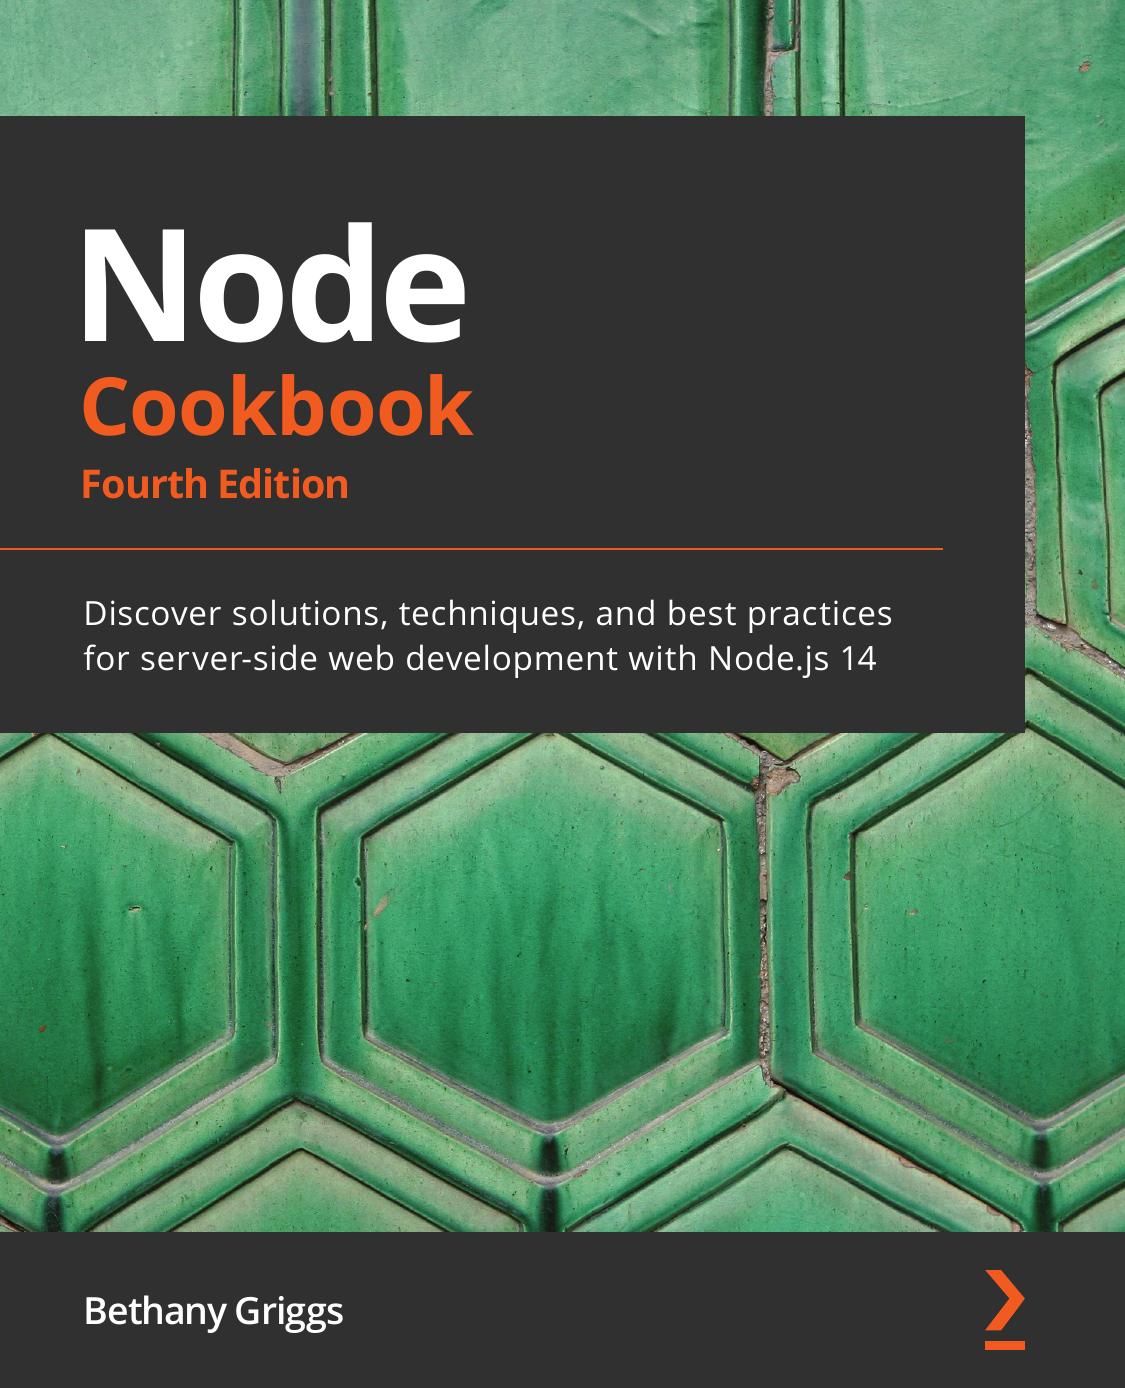 Node Cookbook: Discover Solutions, Techniques, and Best Practices for Server-Side Web Development with Node.js 14